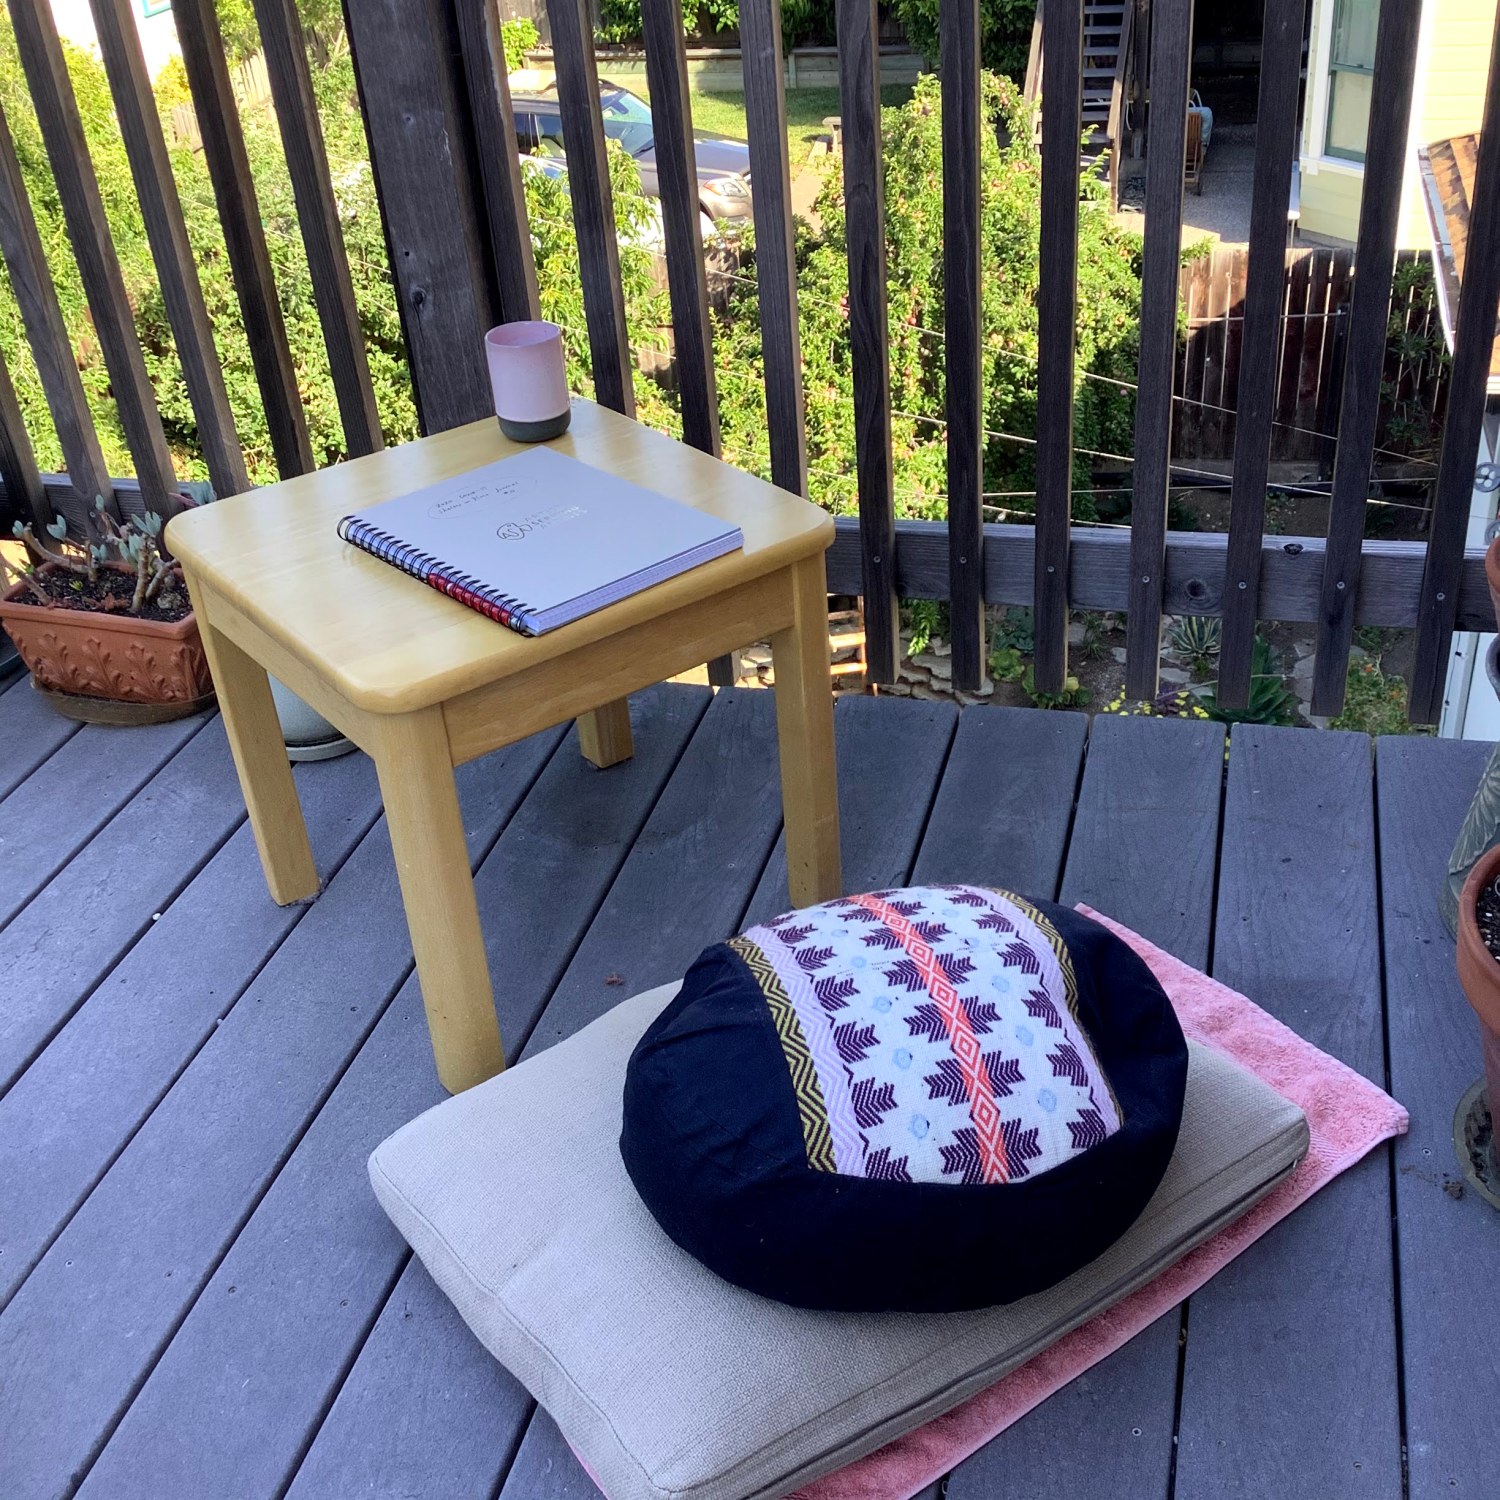 Journal, low table, cushions outside